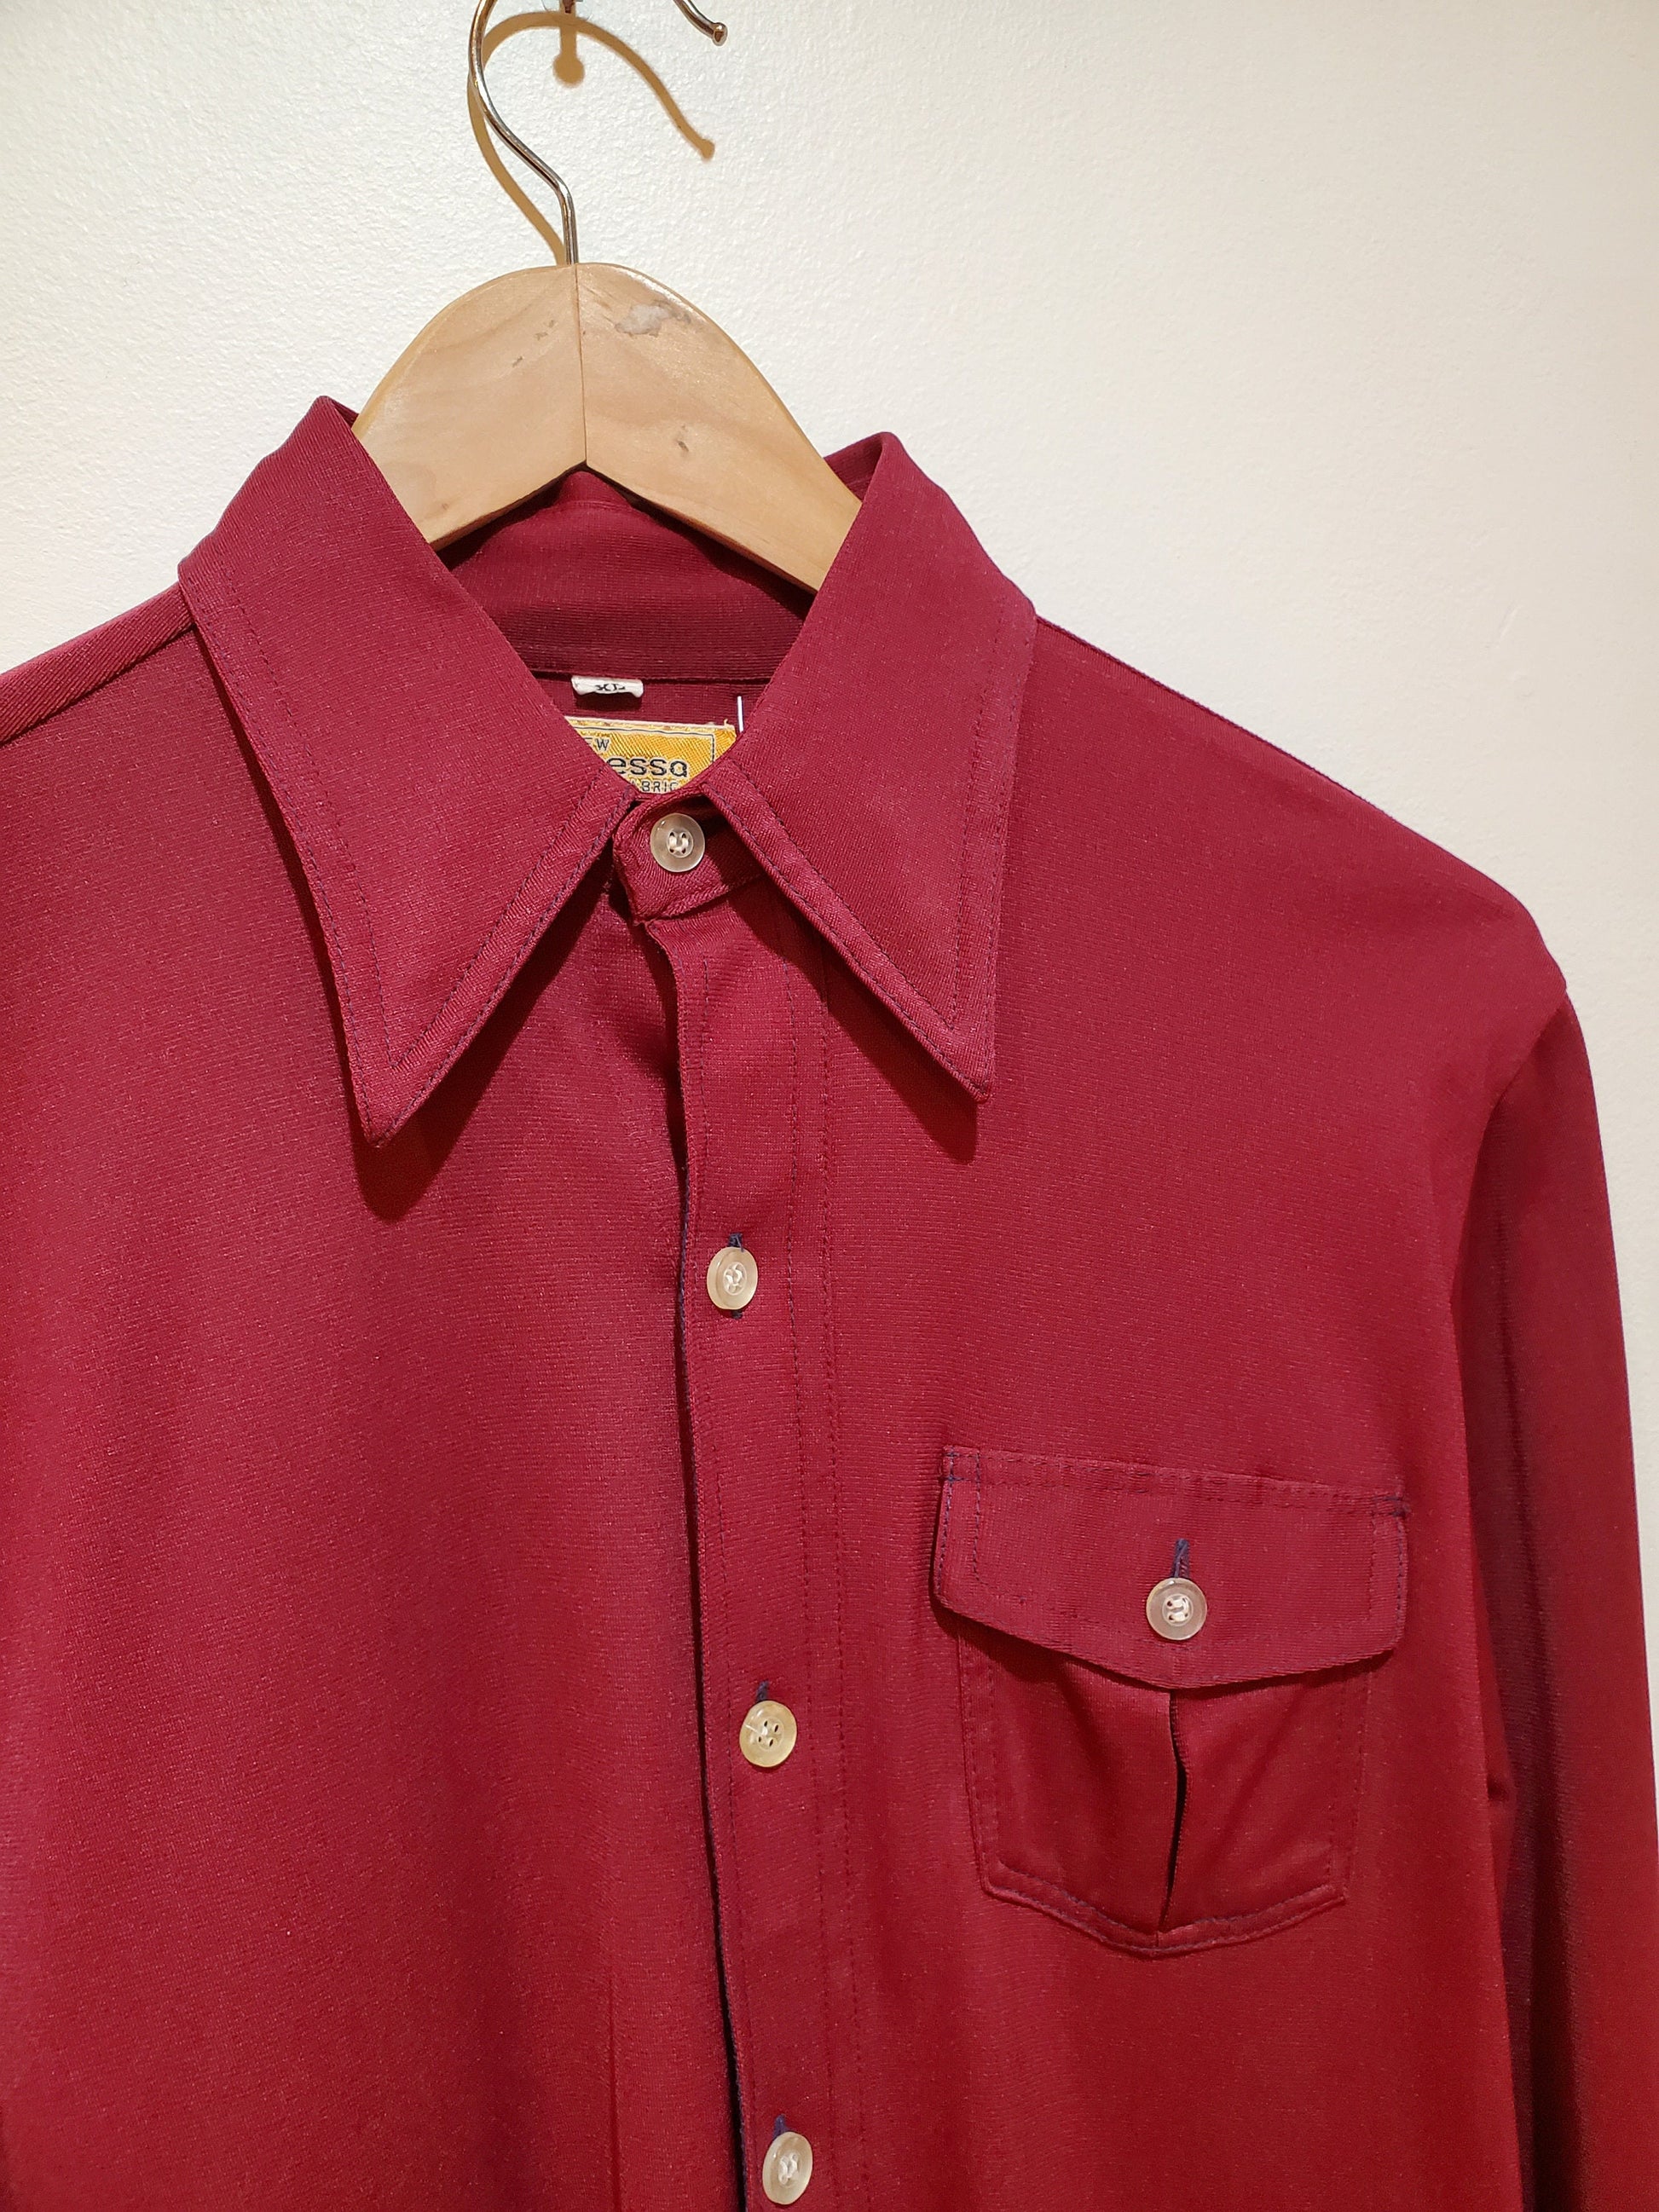 1970s/1980s Quinessa Nylon Button Up Shirt Size S